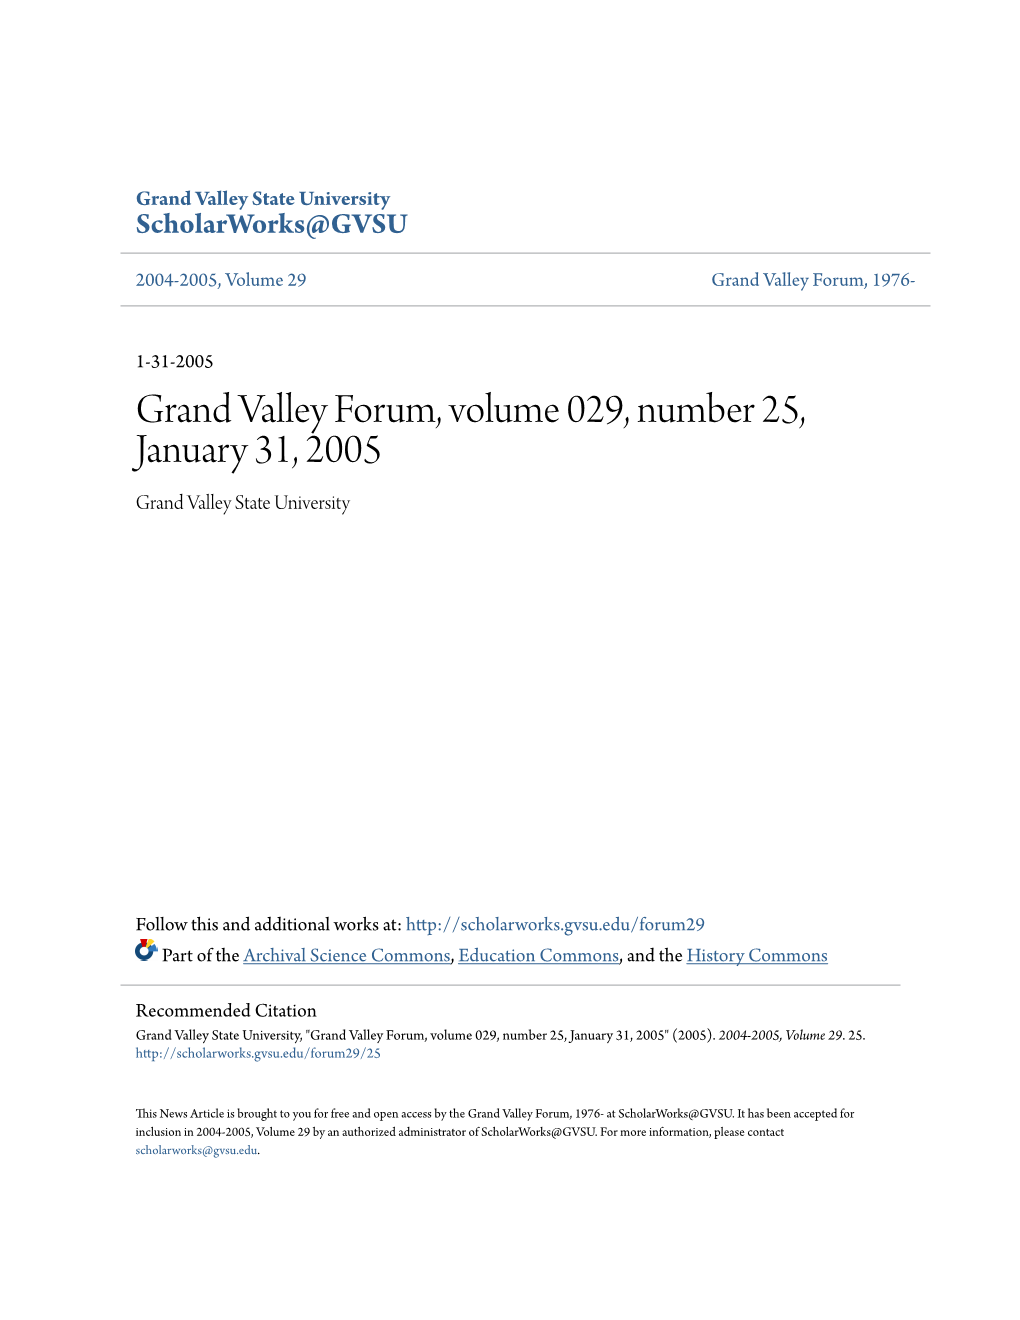 Grand Valley Forum, Volume 029, Number 25, January 31, 2005 Grand Valley State University